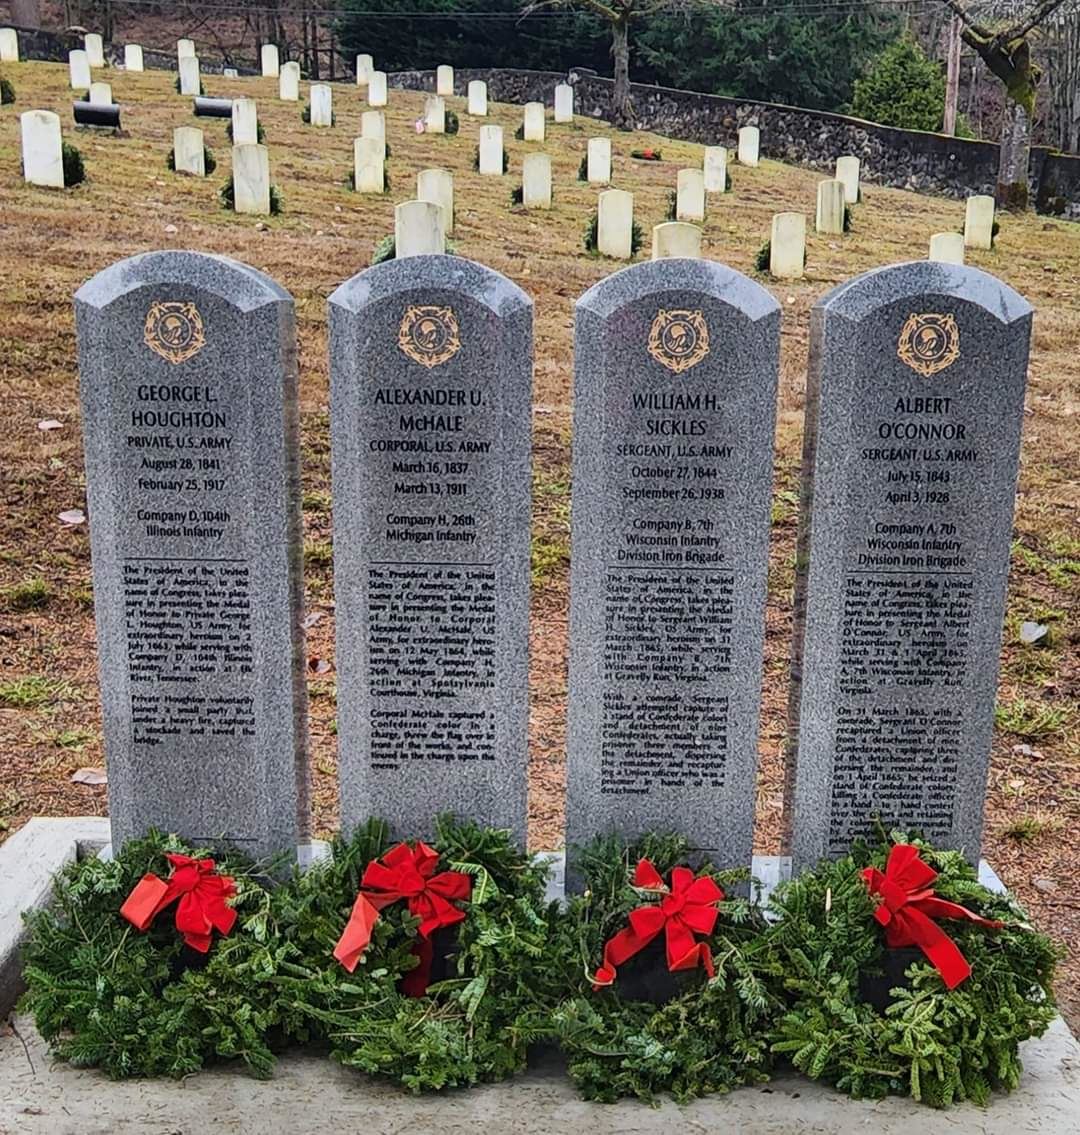 This newly dedicated Medal of Honor Monument at the WA Soldier's Home Cemetery was honored with Wreaths for the first time.